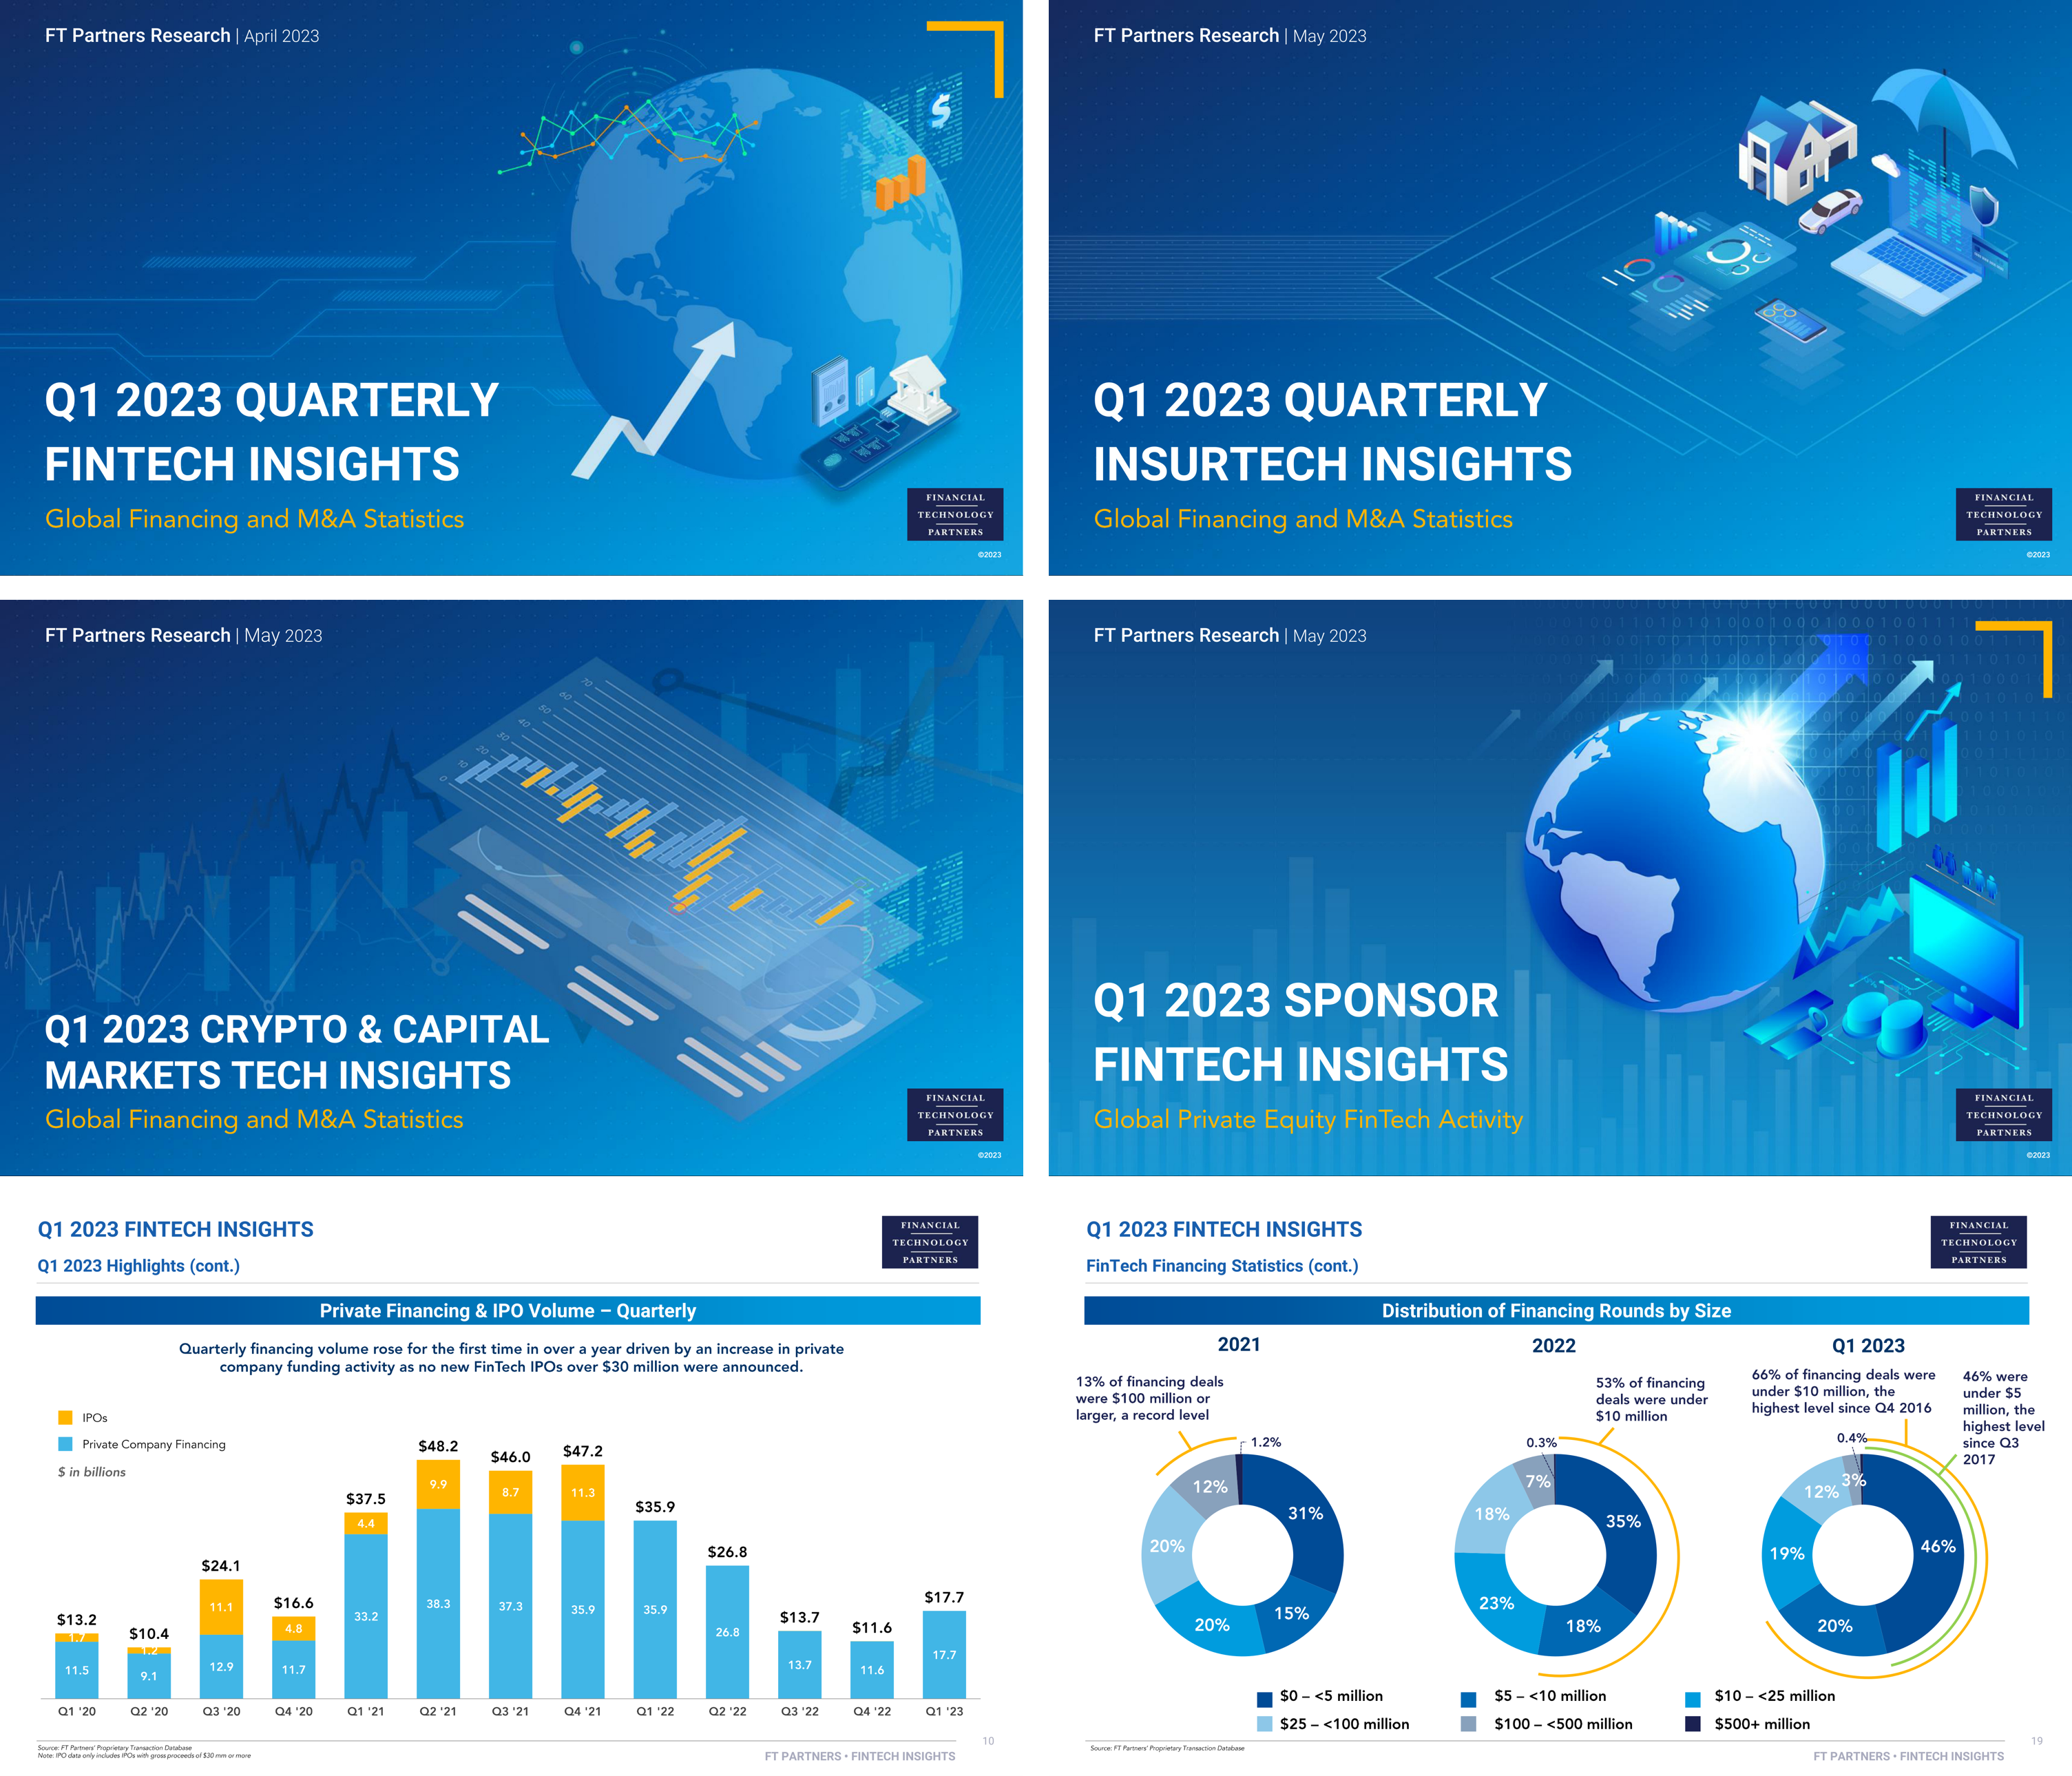 FT Partners publishes Q1 2023 FinTech Insights reports